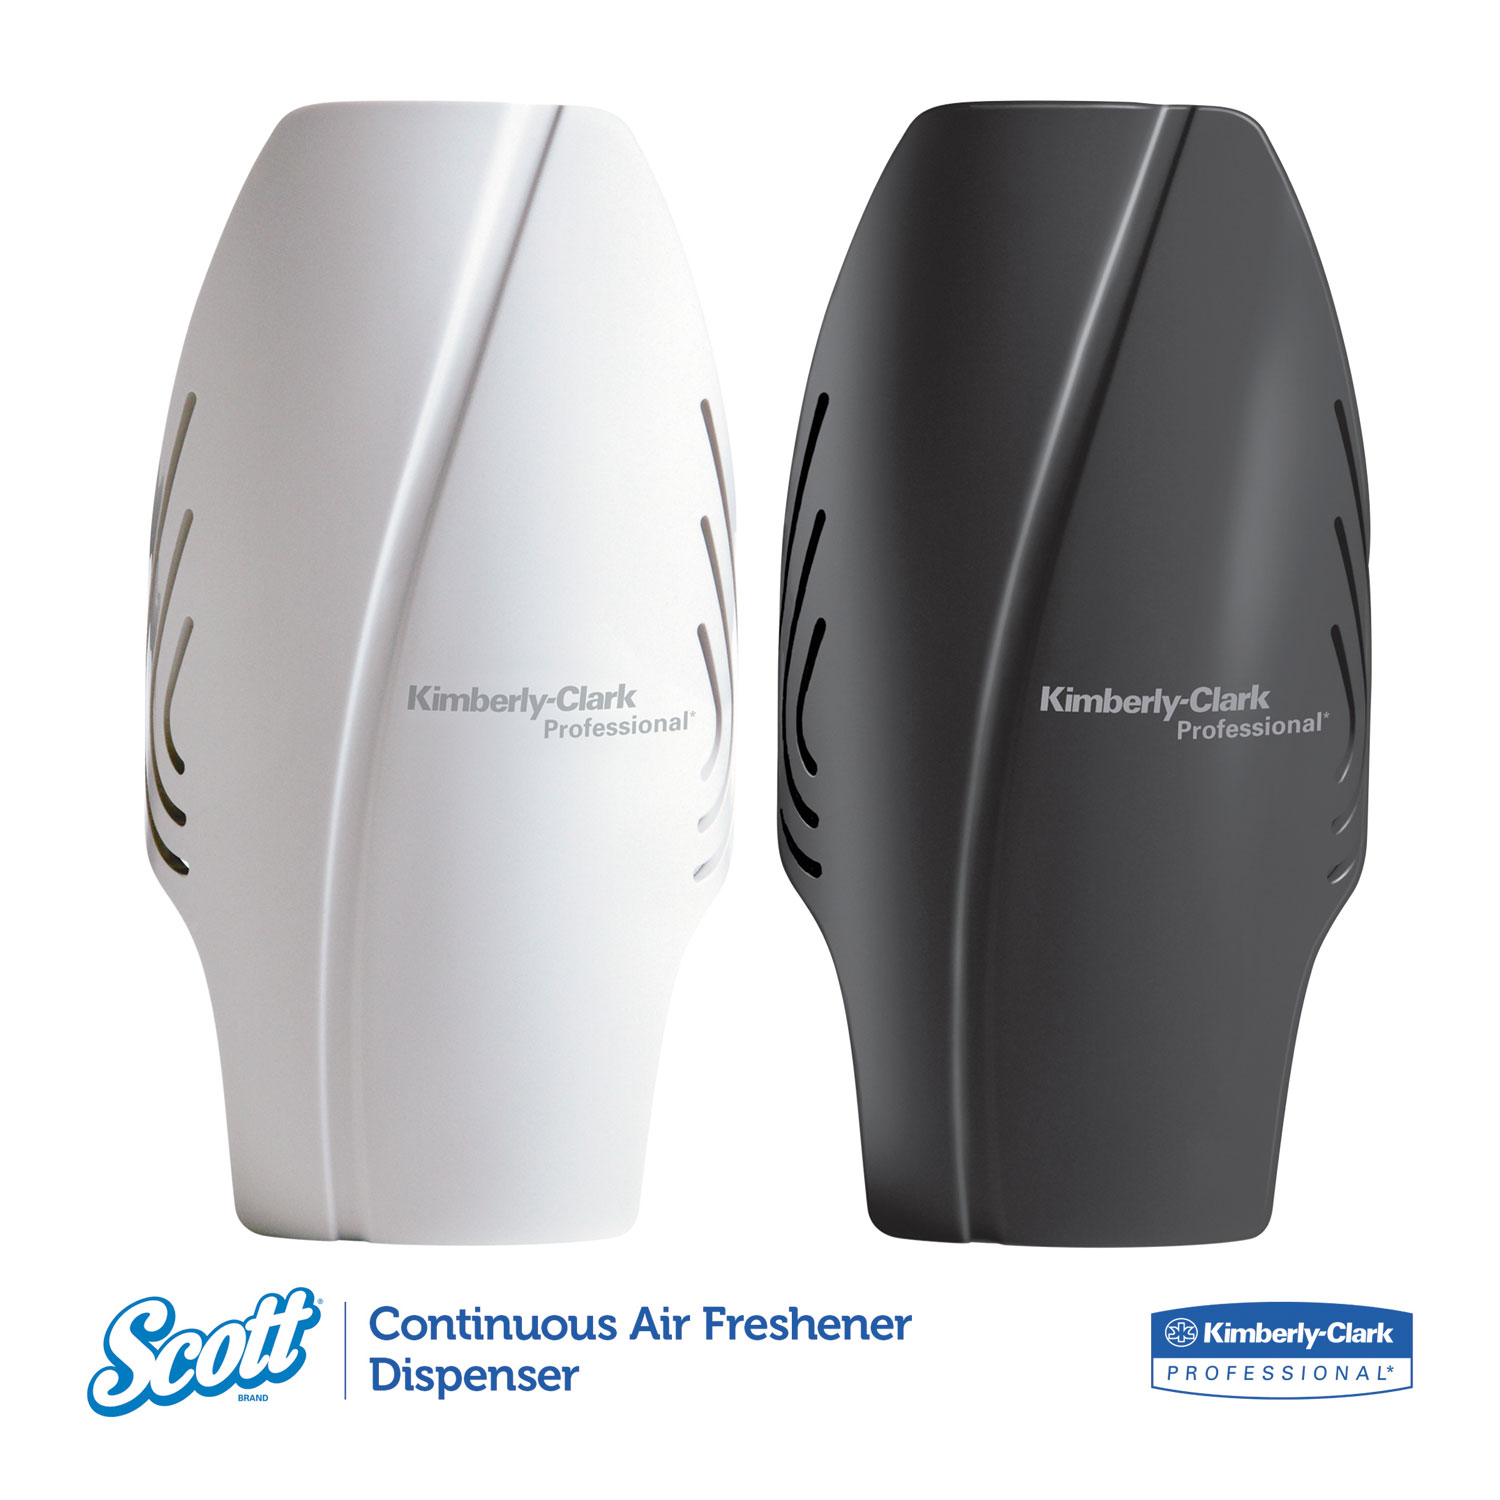 Scott 92621 2.8 in. x 2.4 in. x 5 in. Continuous Air Freshener Dispenser - Smoke - image 3 of 5